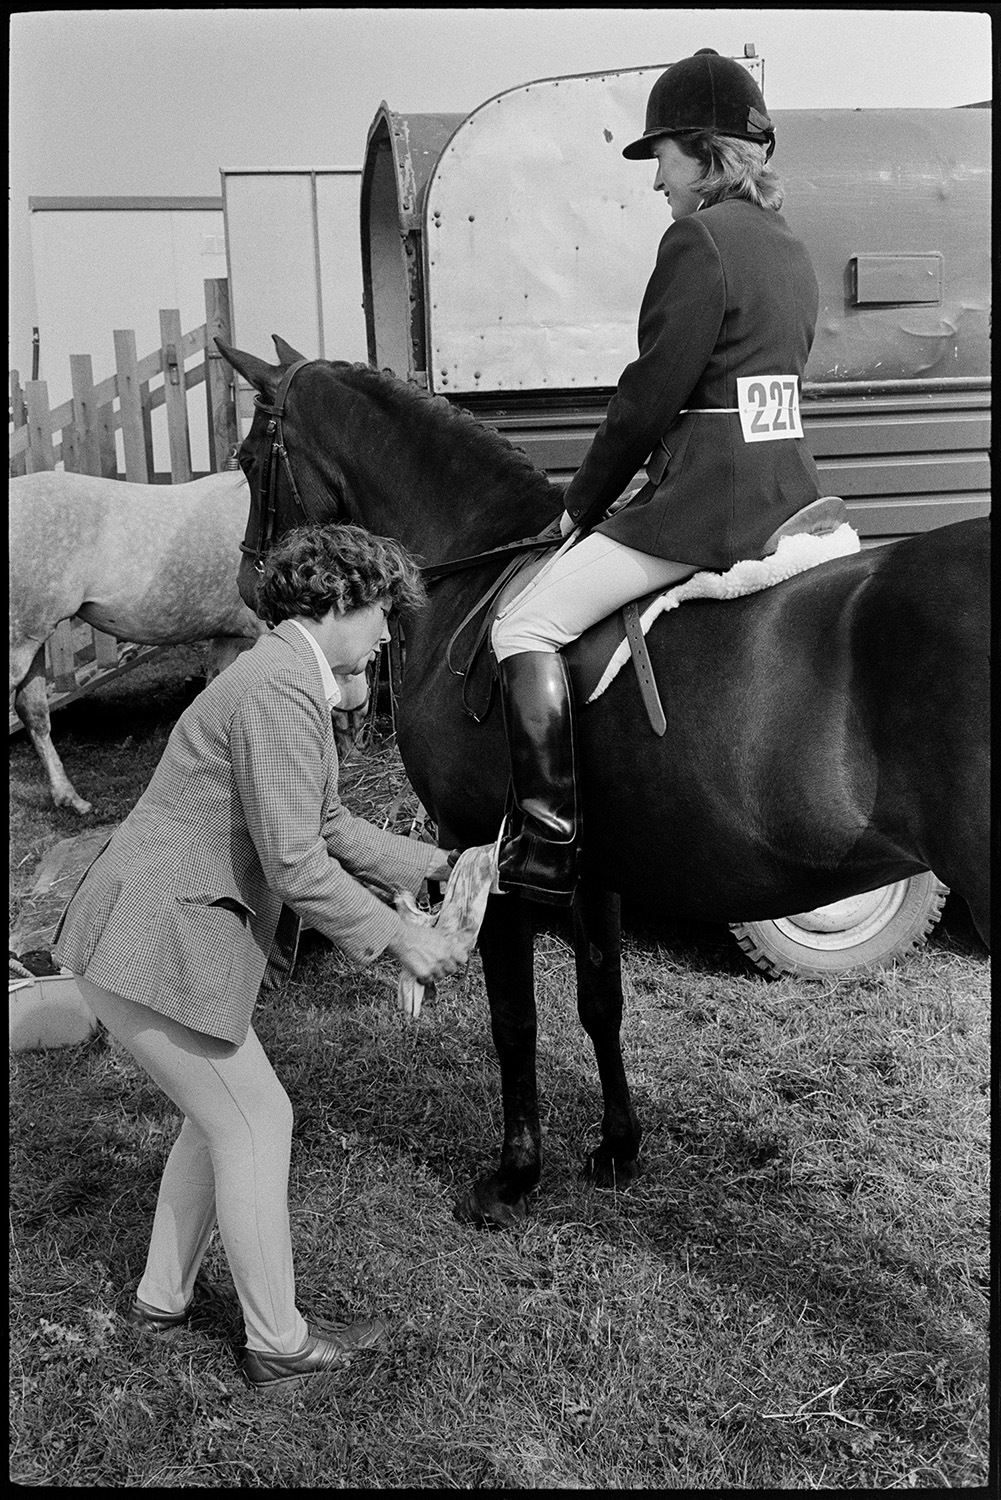 Competitors preparing gymkhana, horseboxes. 
[A woman shining the boots of a mounted horse rider at Beaford Gymkhana, by a horsebox.]